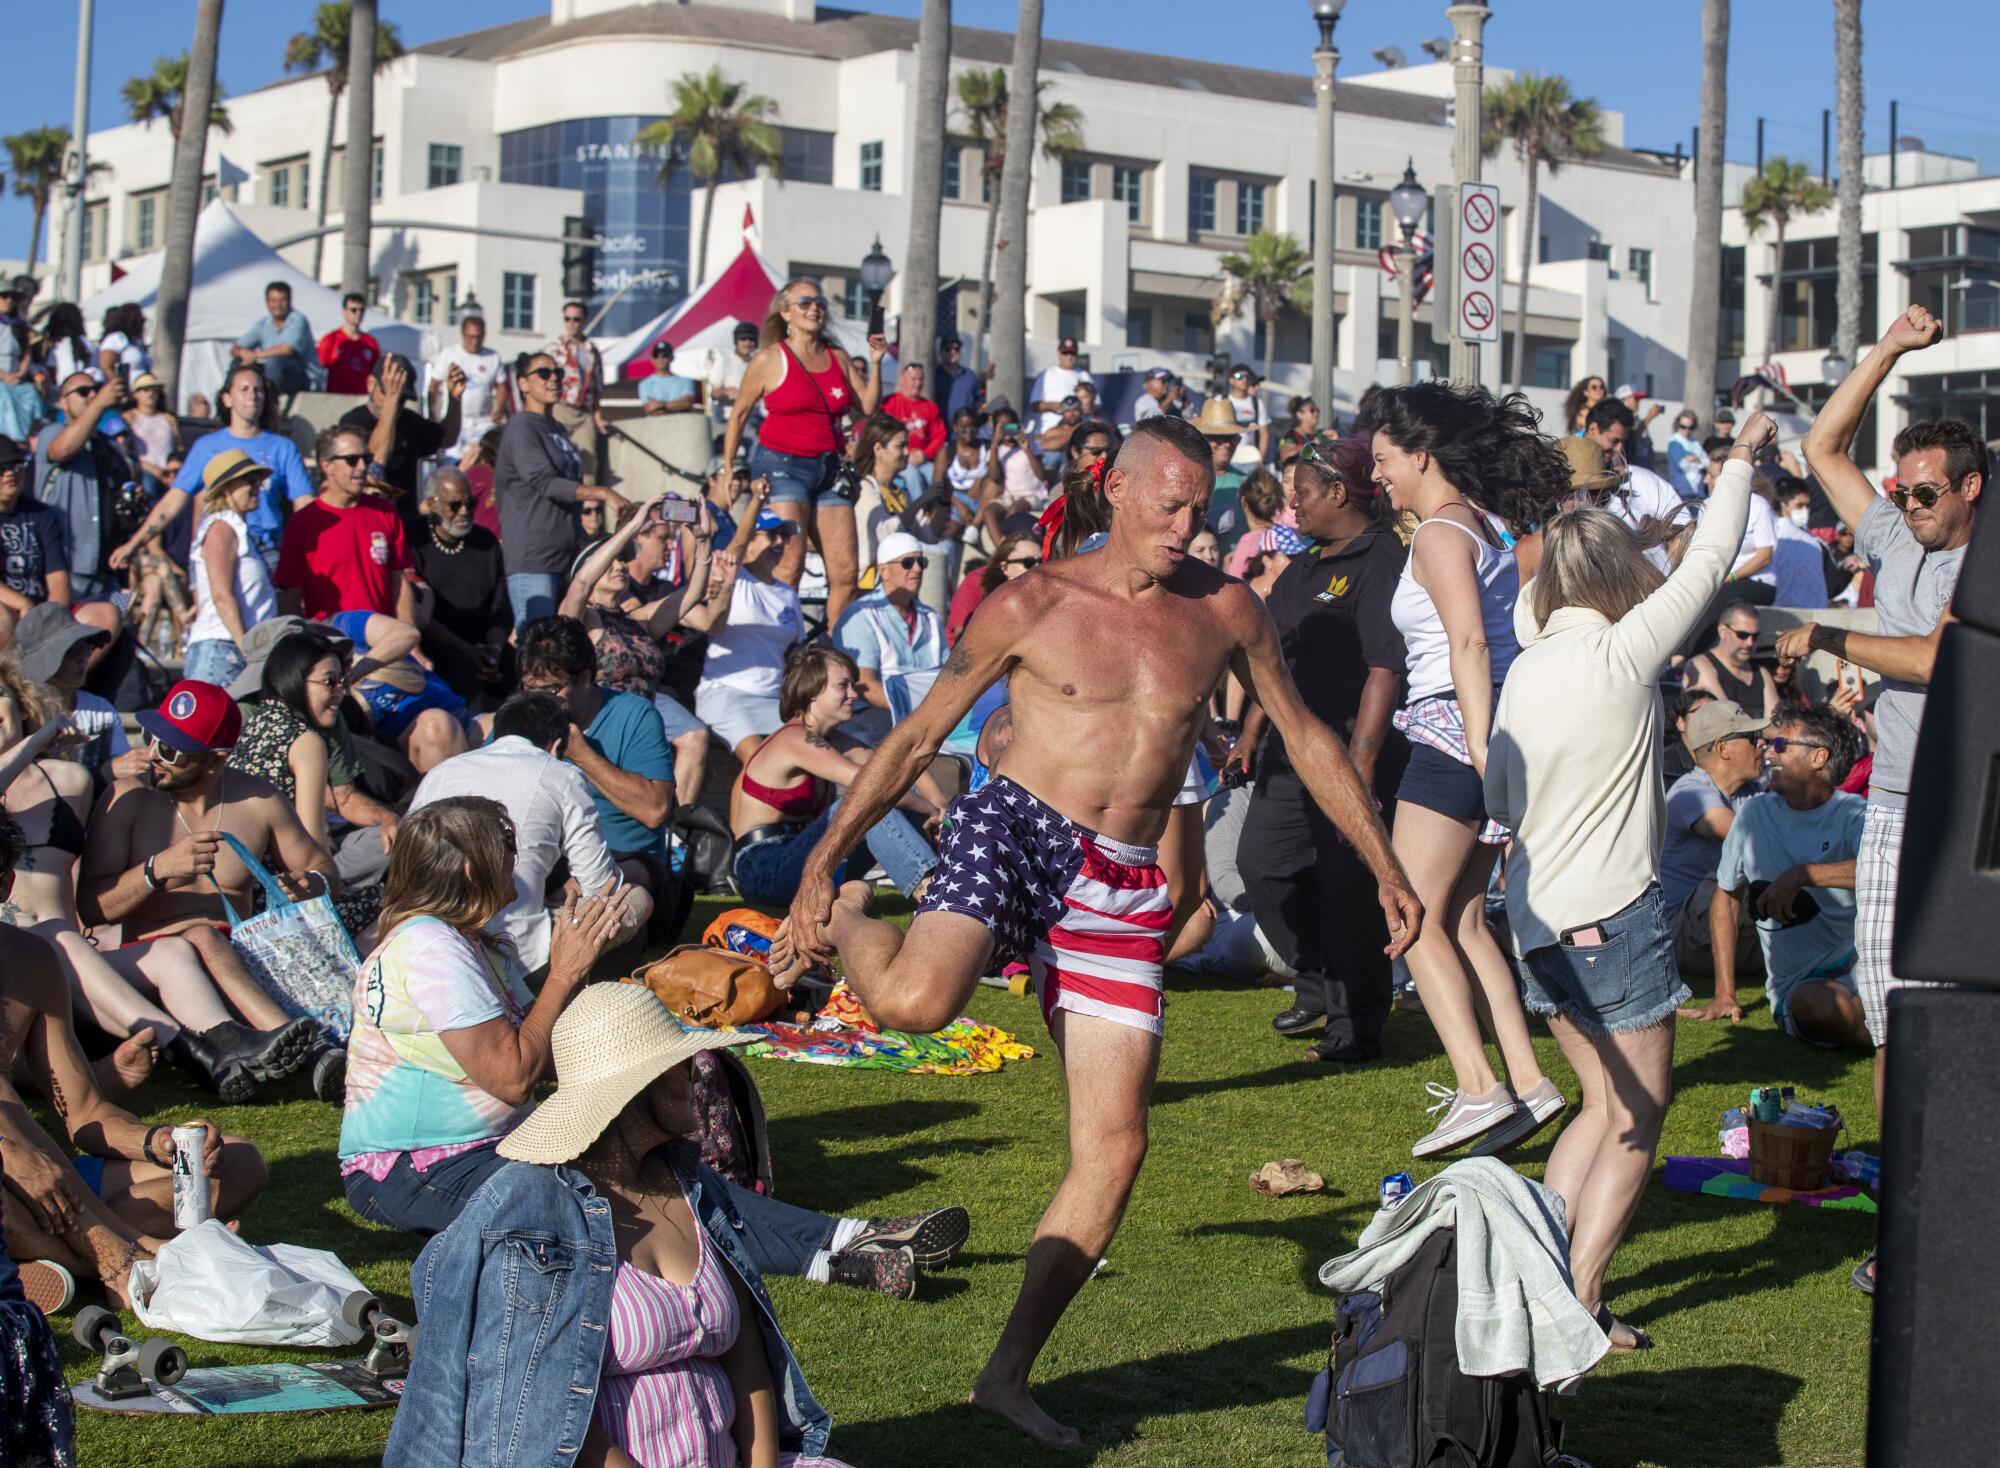 A man wearing shorts in U.S. flag colors holds his ankle with one hand near people dancing on a lawn
